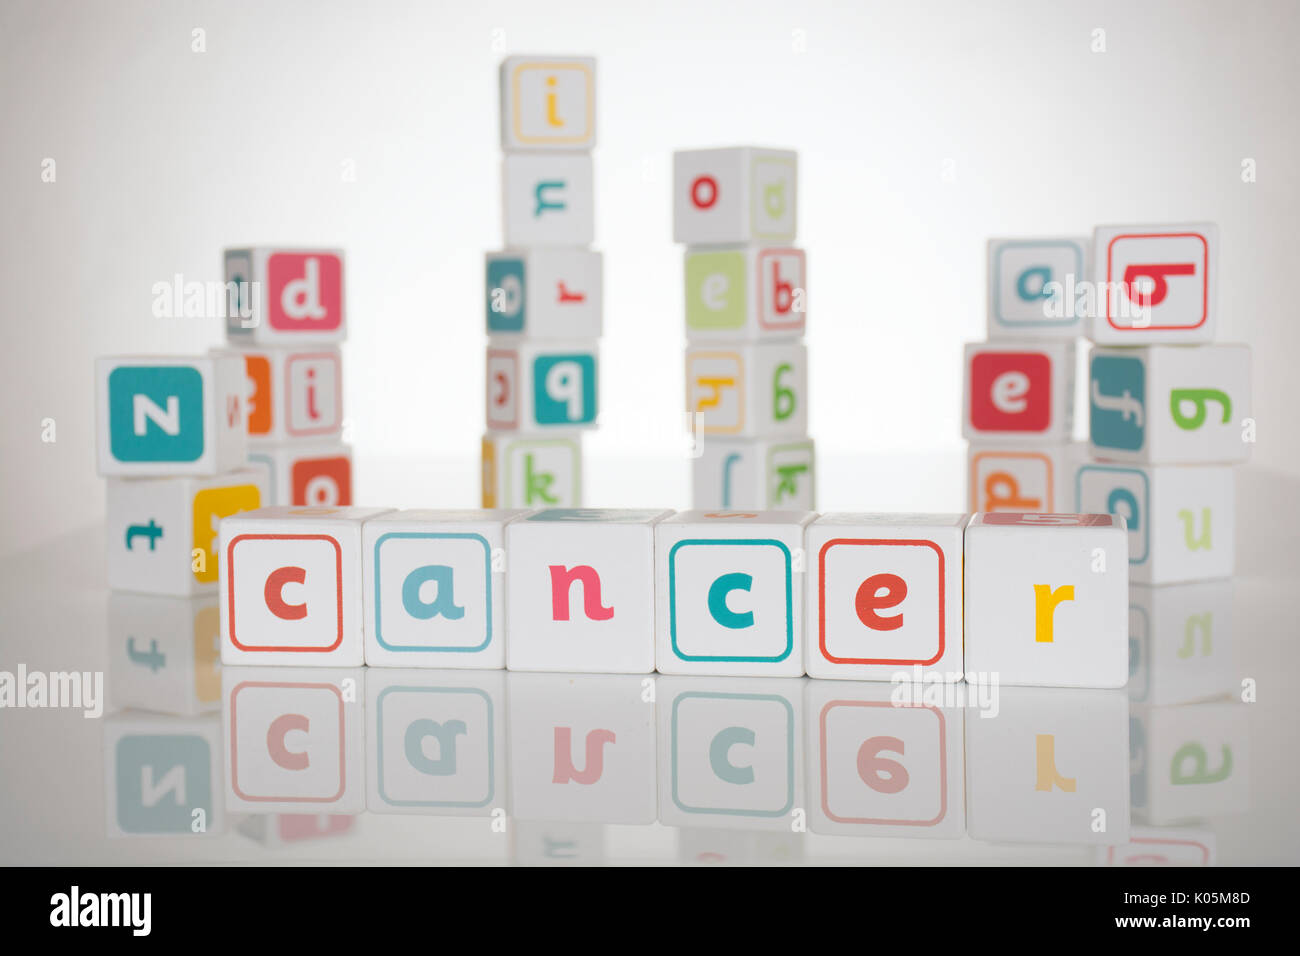 Childhood cancer spelled out in toy building blocks Stock Photo